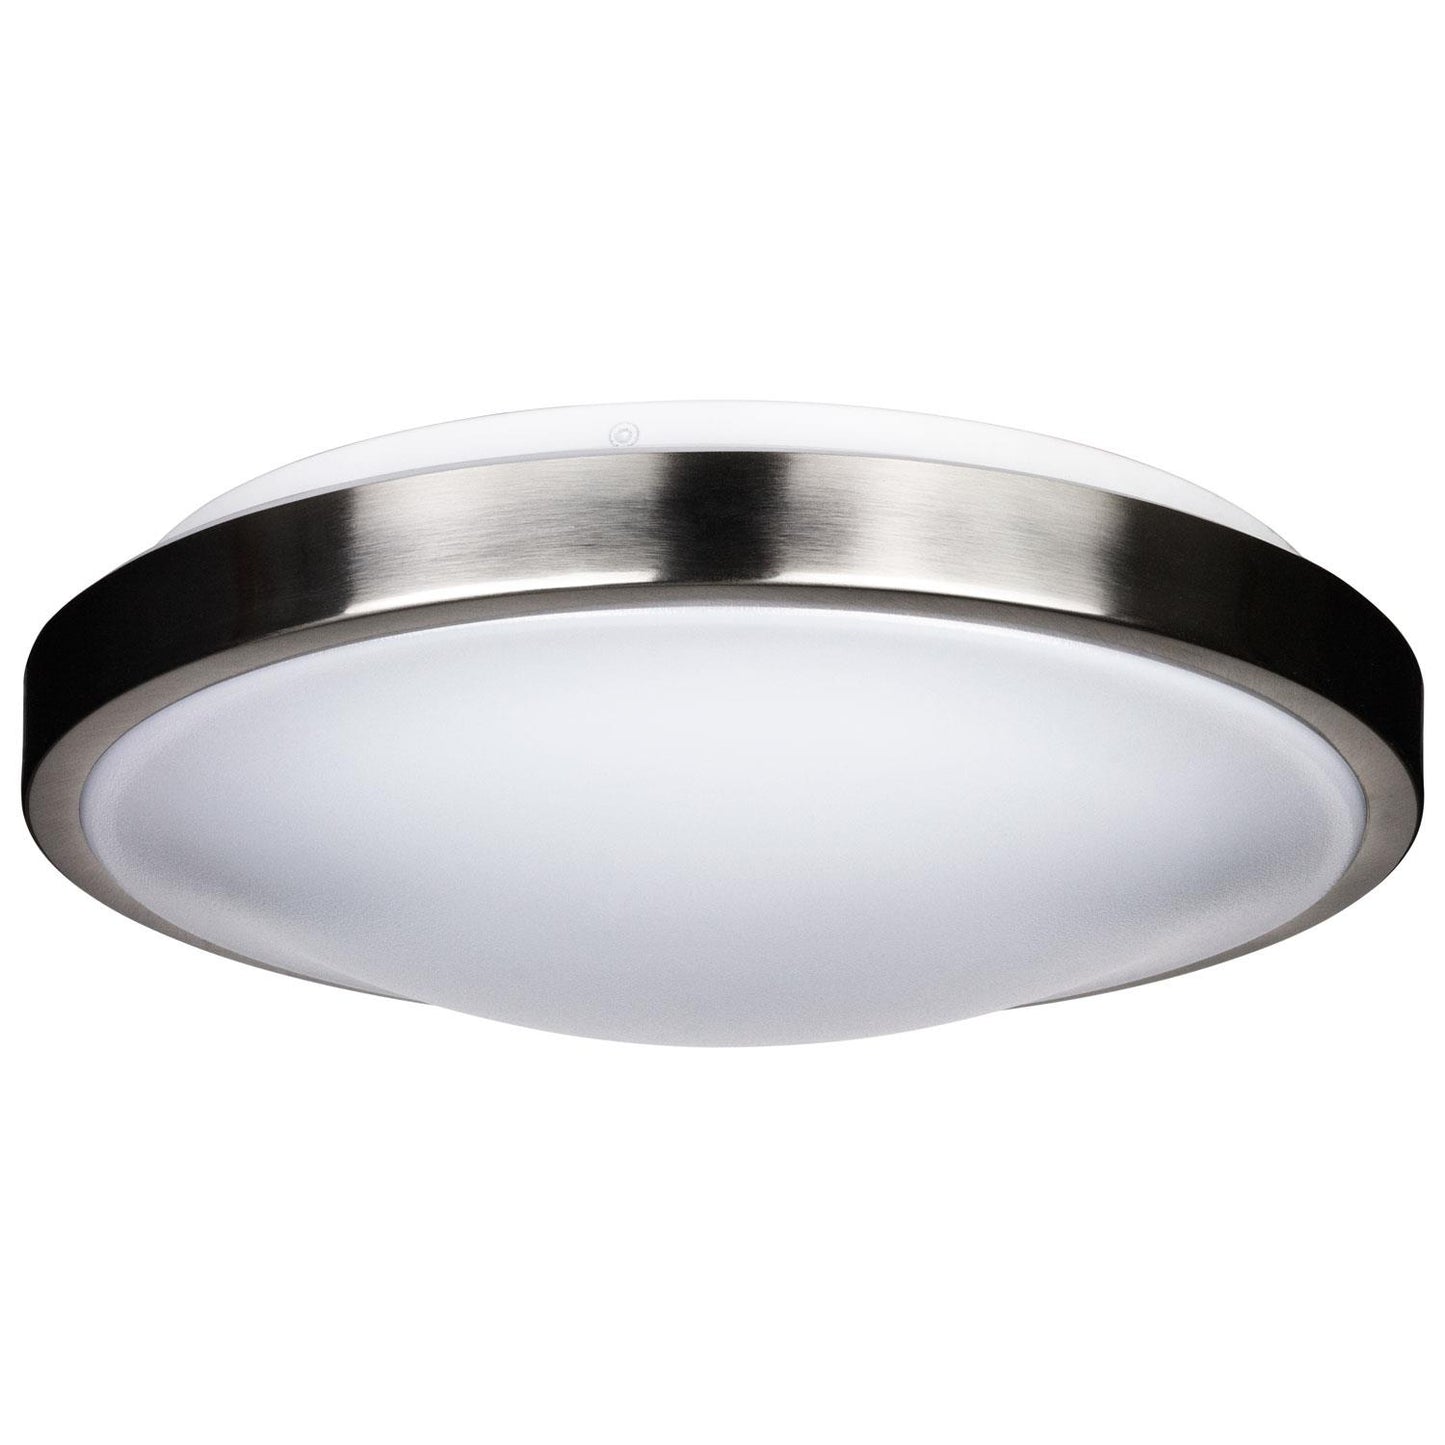 Sunlite 12" 15 Watt 120 Volt LED Decorative Band Trim Style Fixture, Brushed Nickel Finish, Energy Star Dimmable